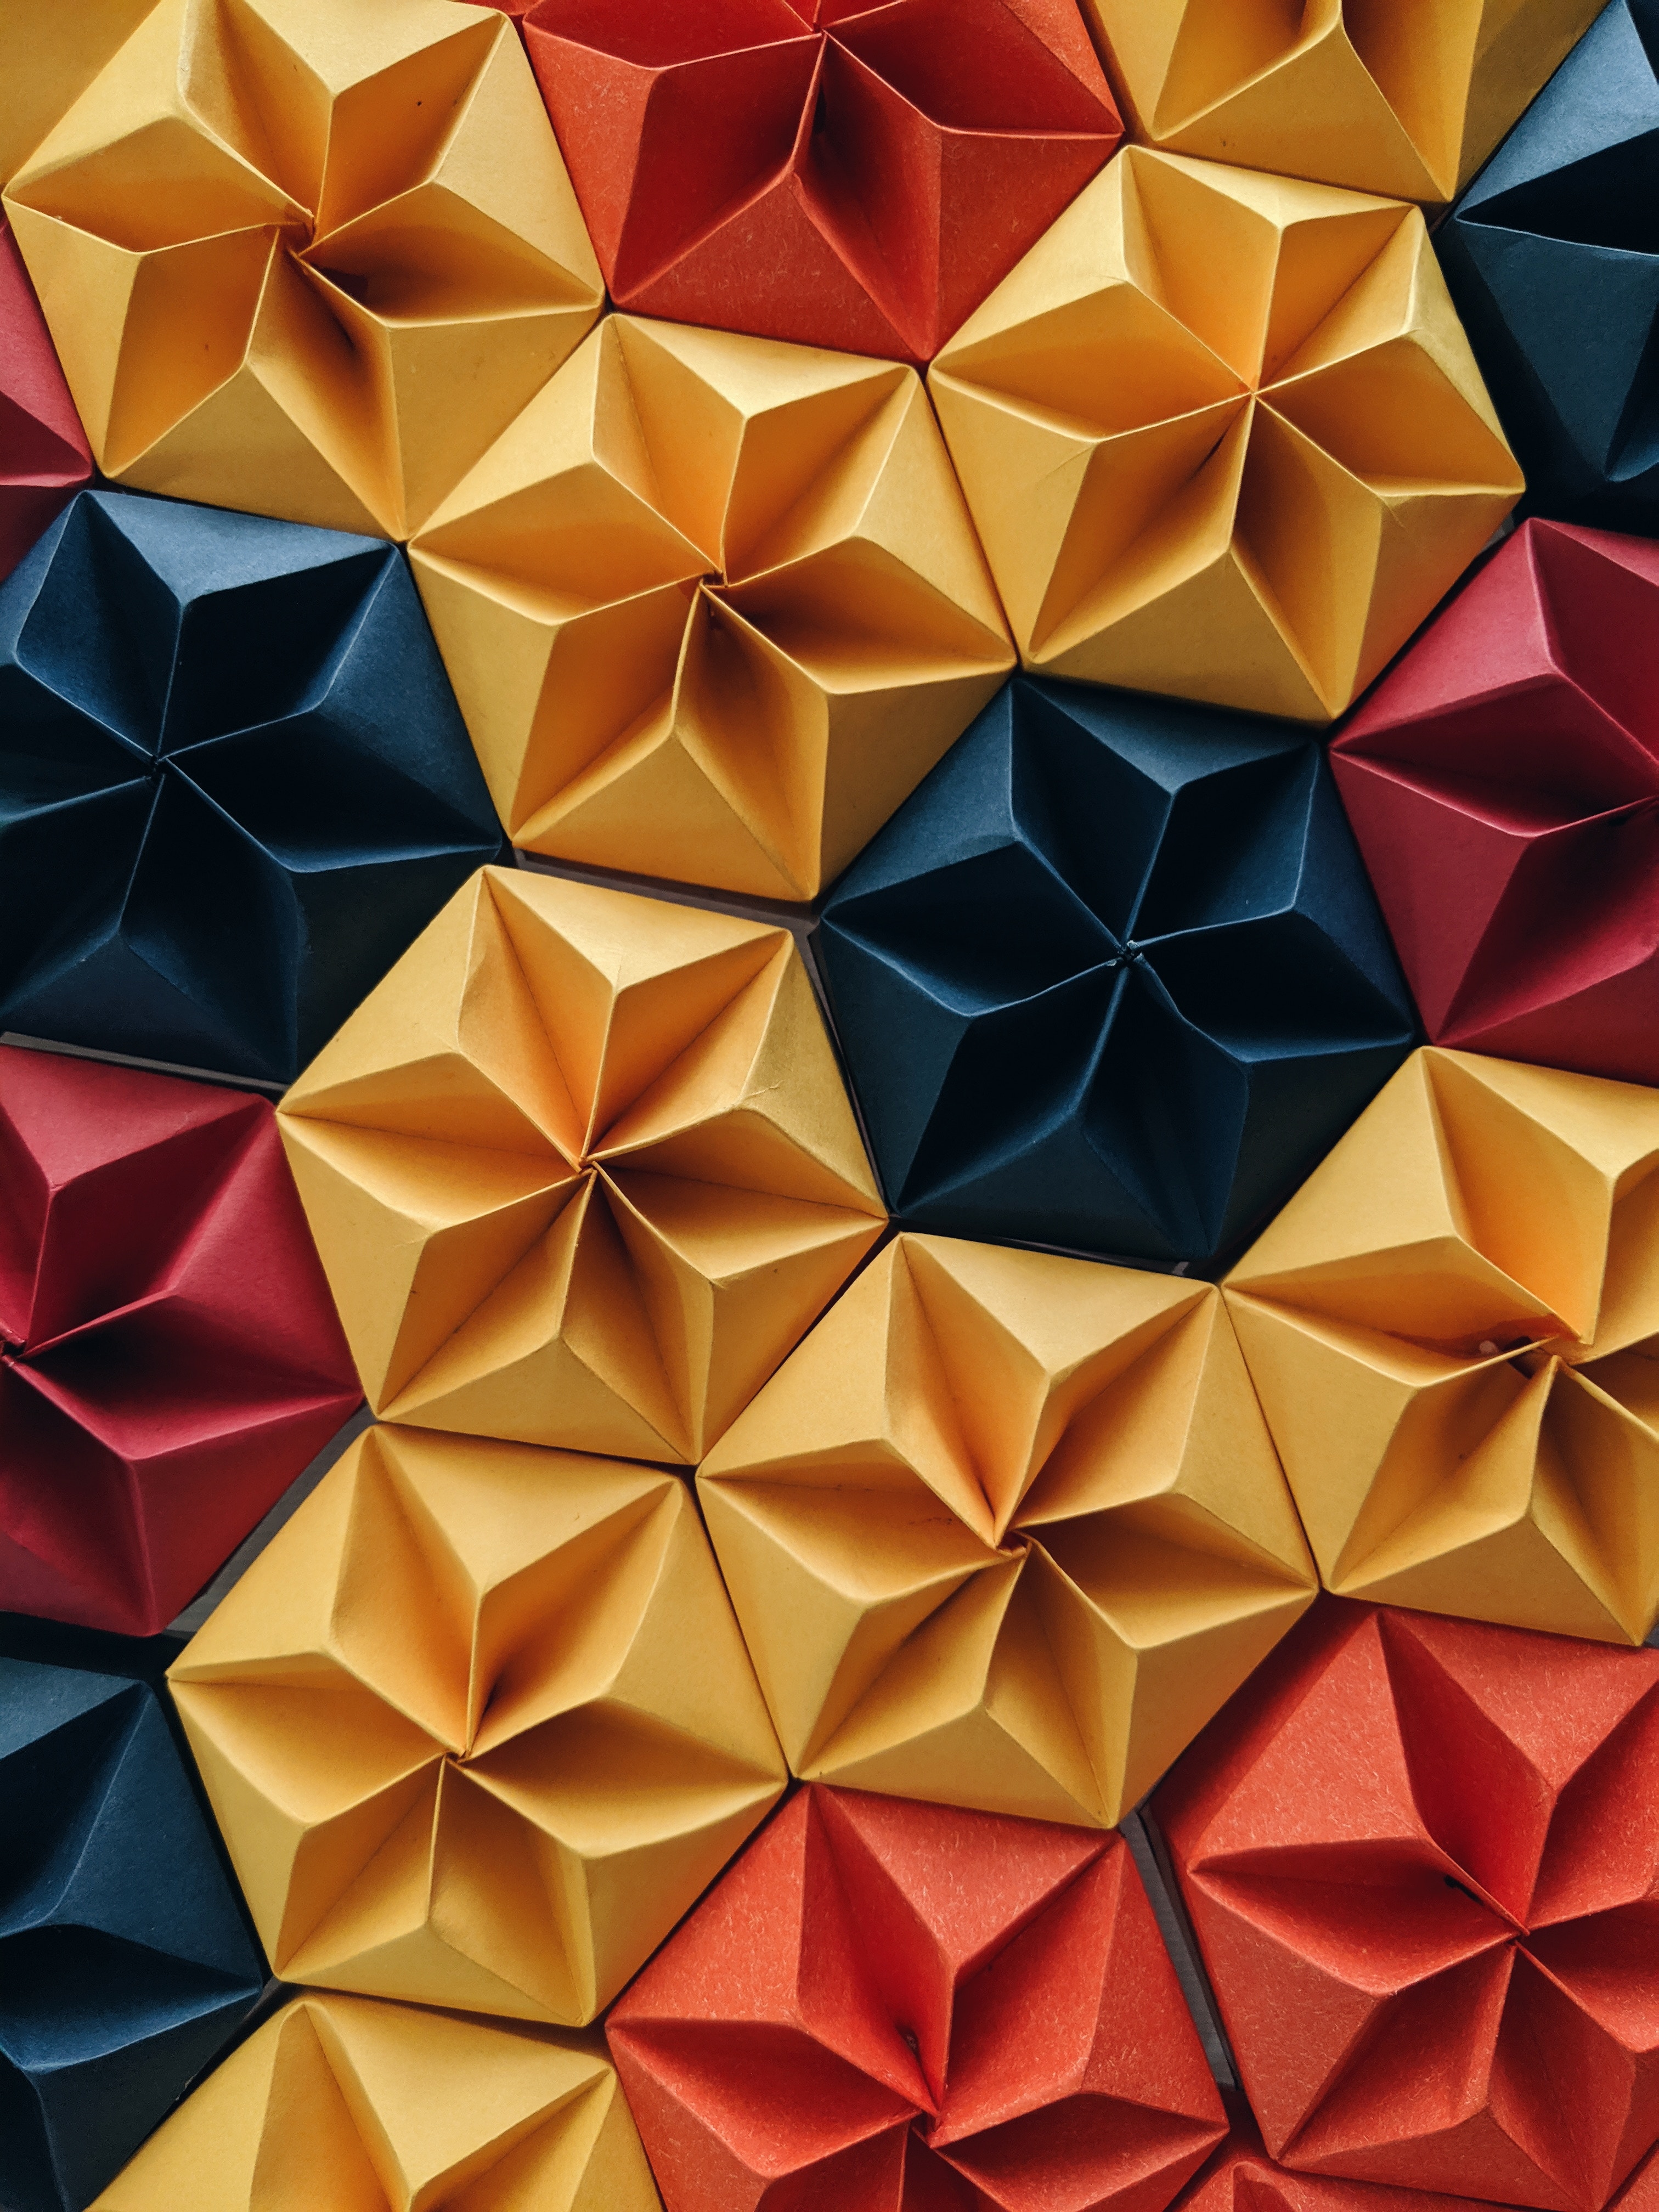 multicolored, motley, texture, textures, shape, shapes, paper, origami UHD